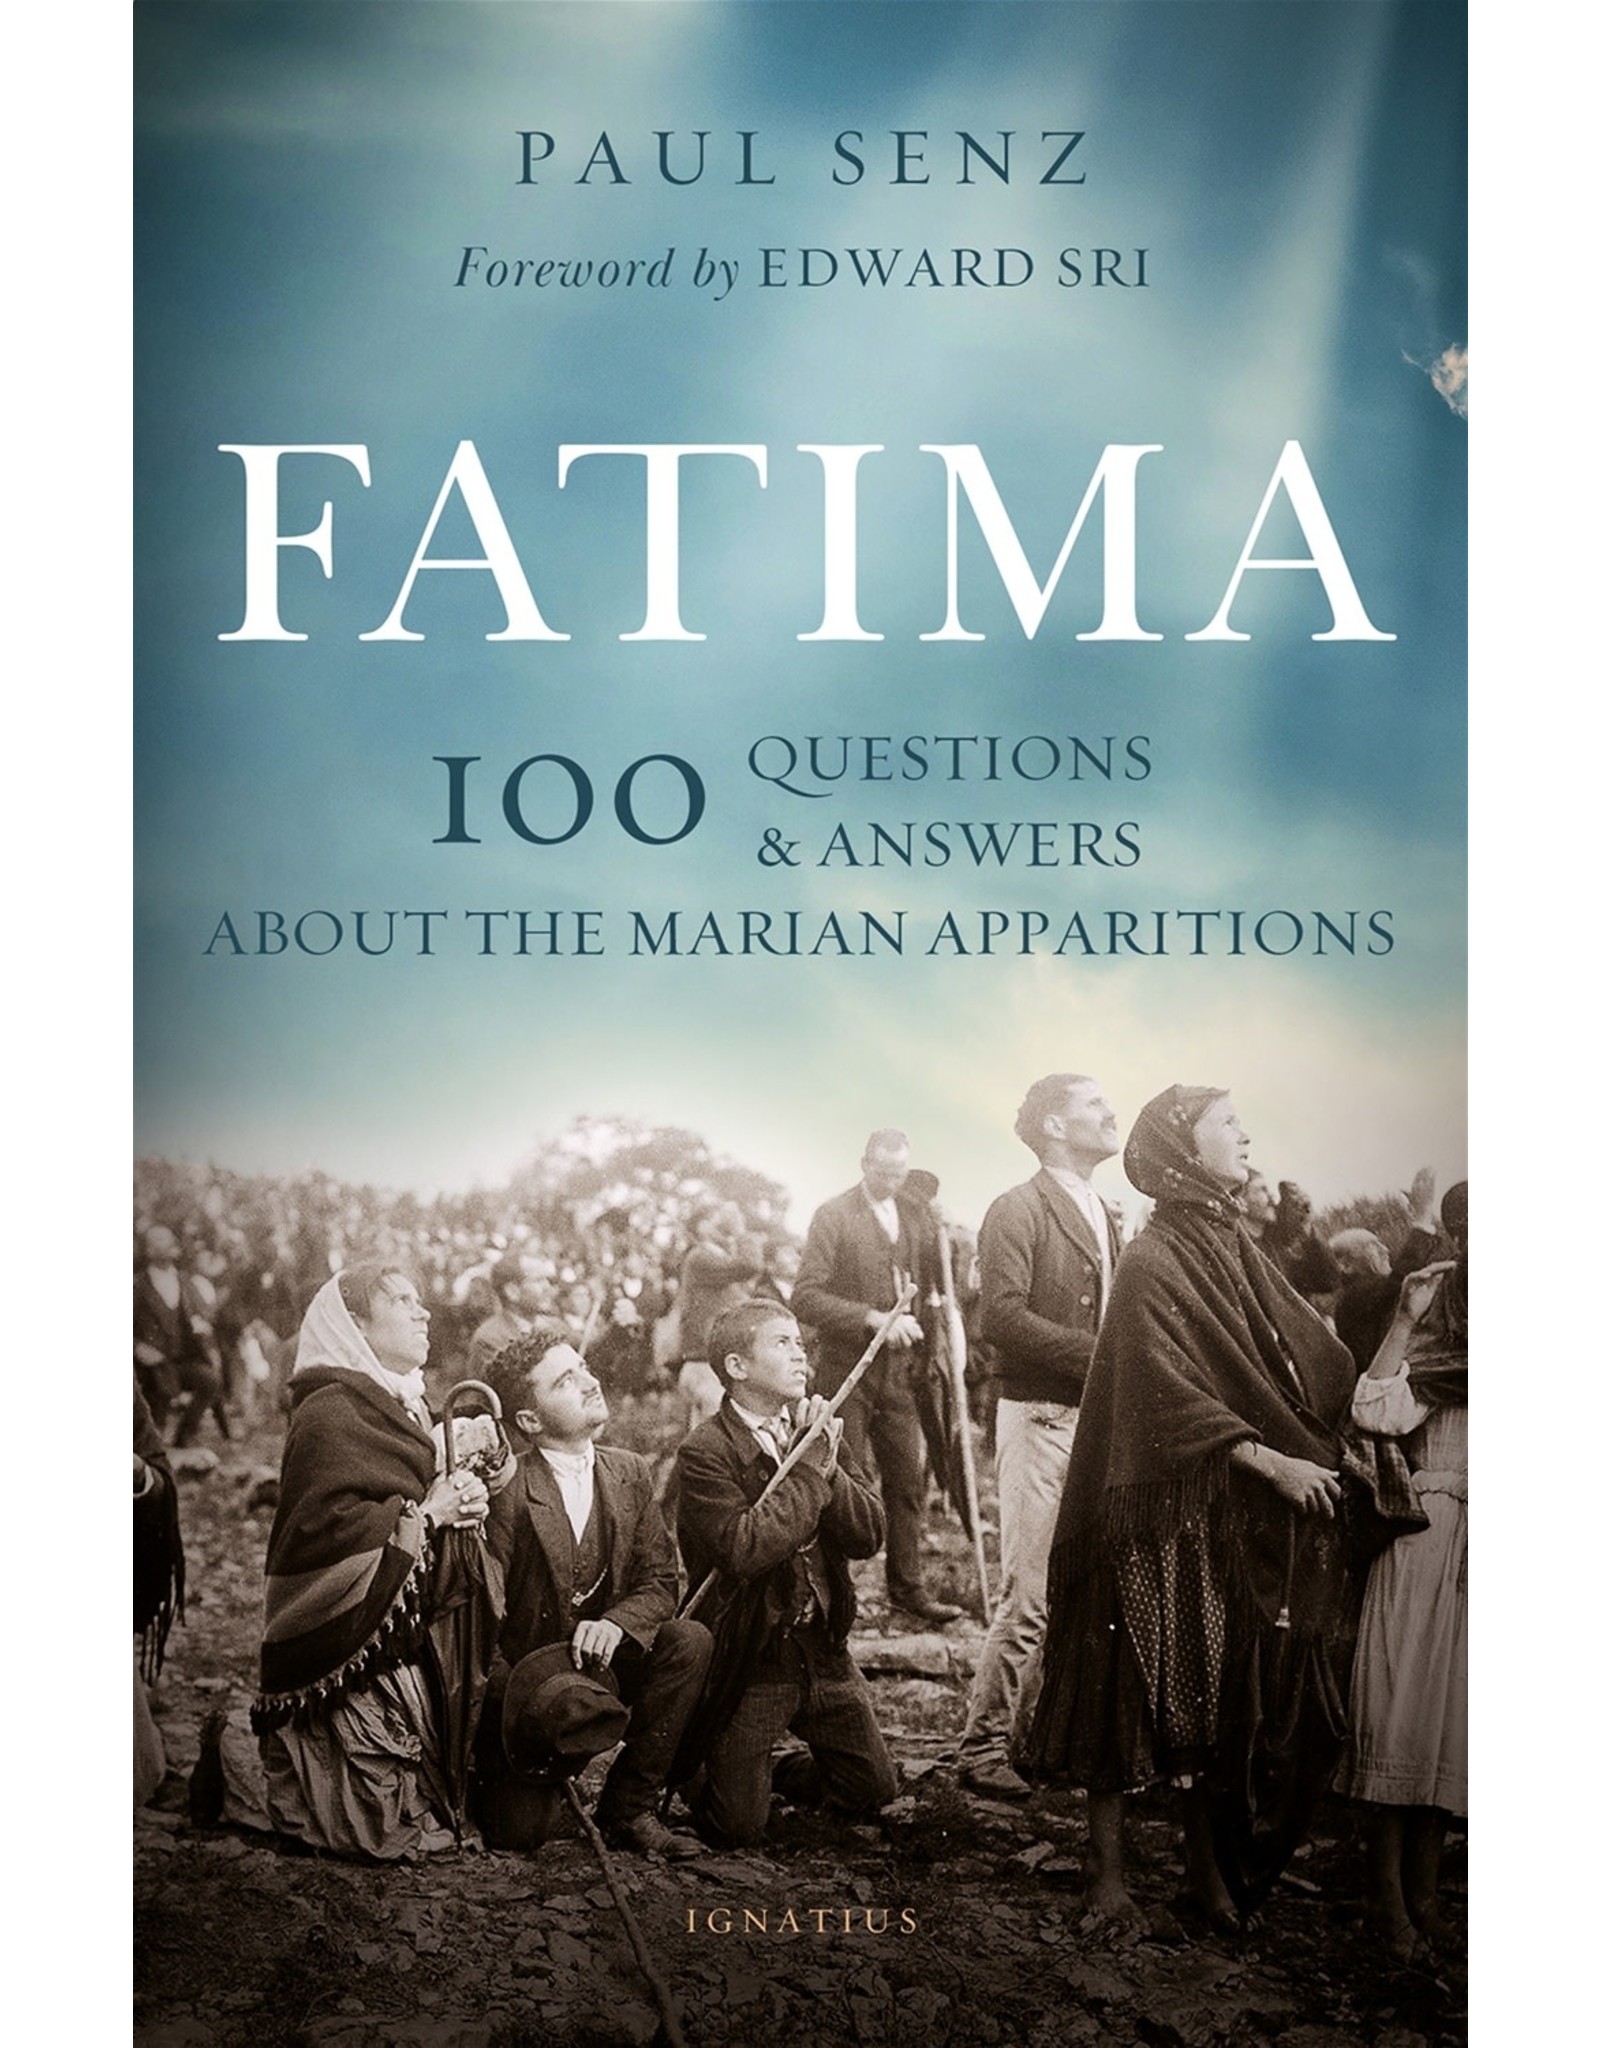 Fatima: 100 Questions & Answers on the Marian Apparitions